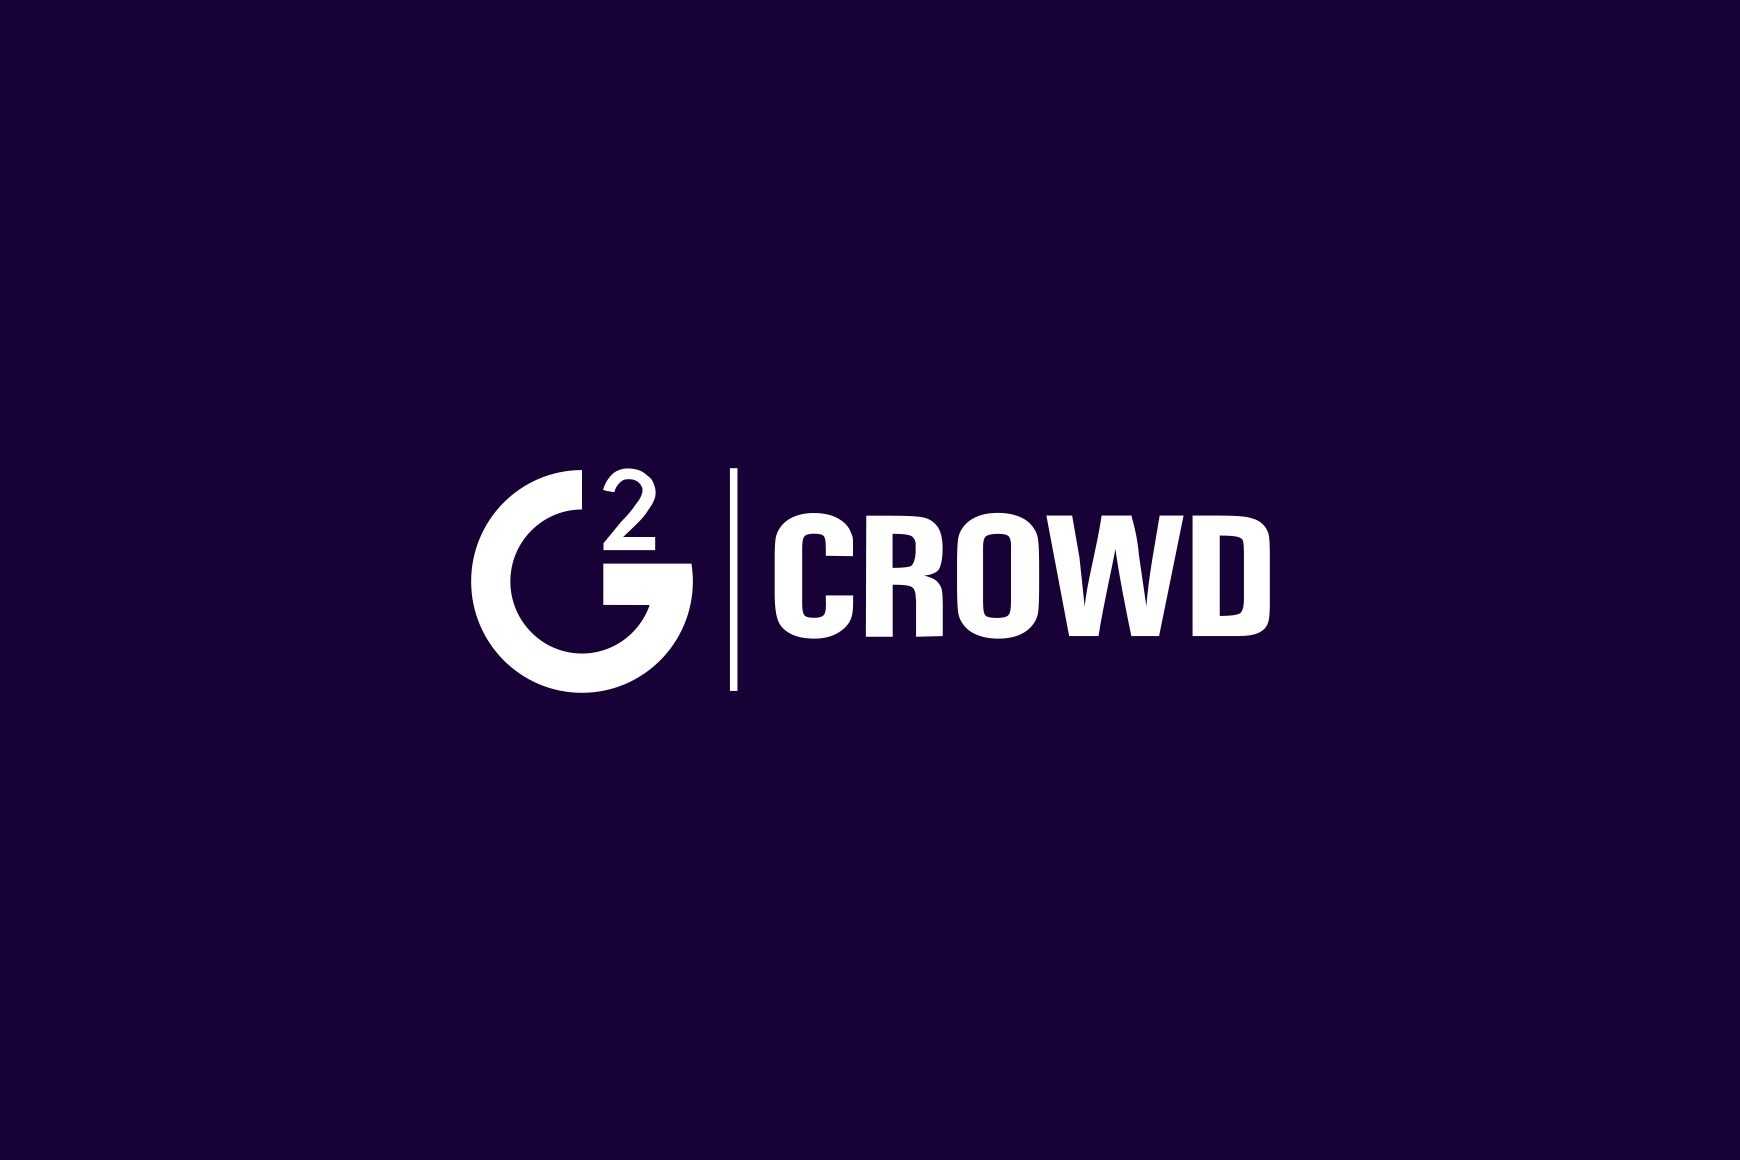 G2 Crowd awards Talkdesk’s Contact Center as High Performer